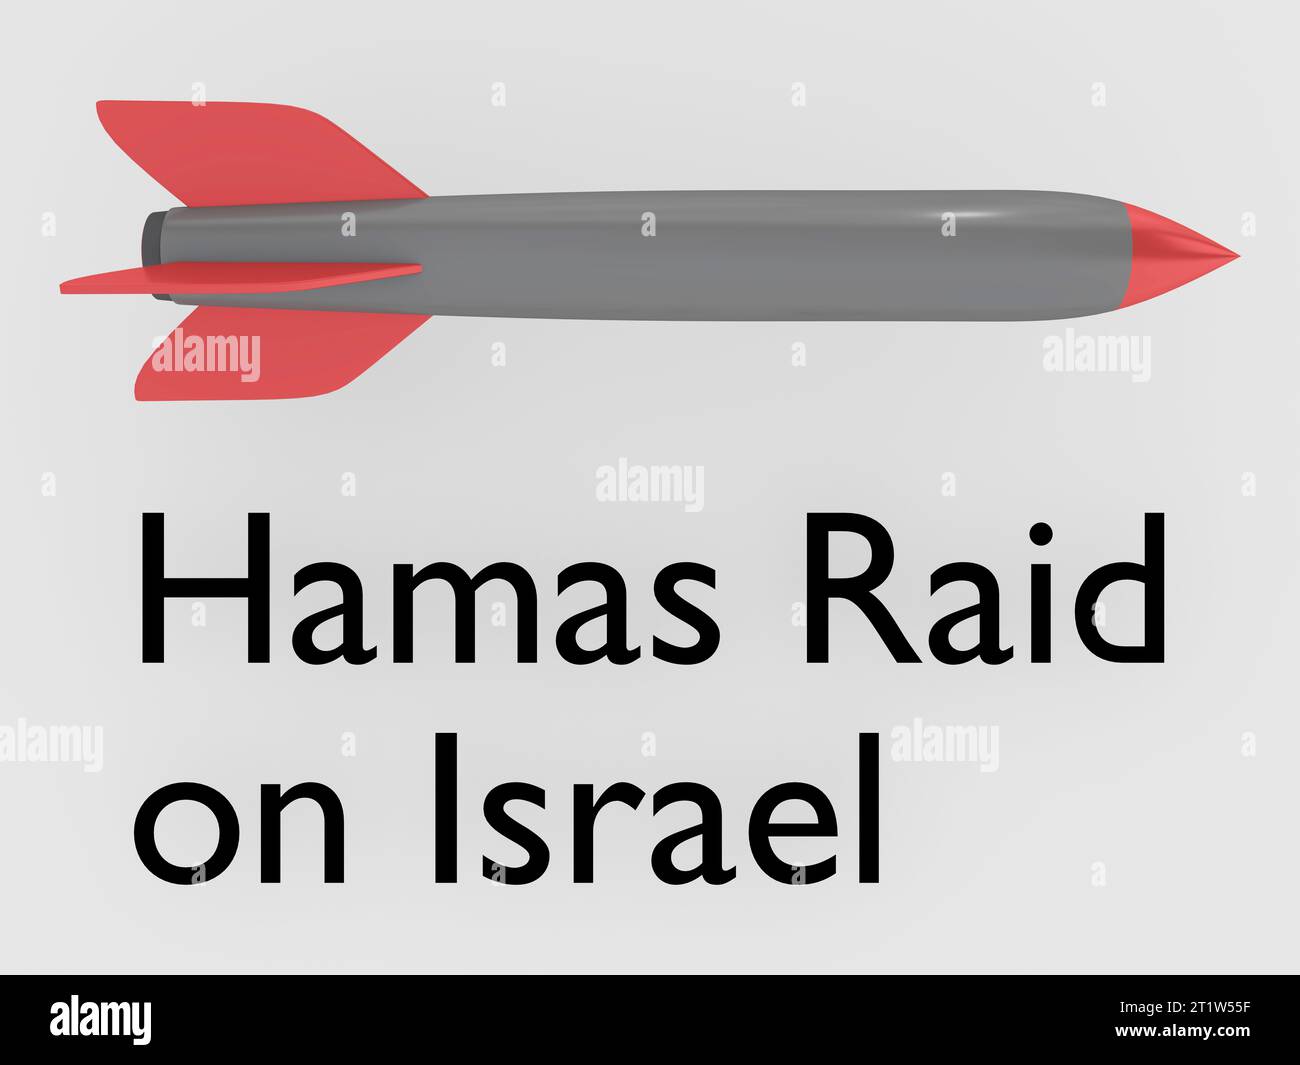 3D illustration of a missile, titled as Hamas Raid on Israel. Stock Photo